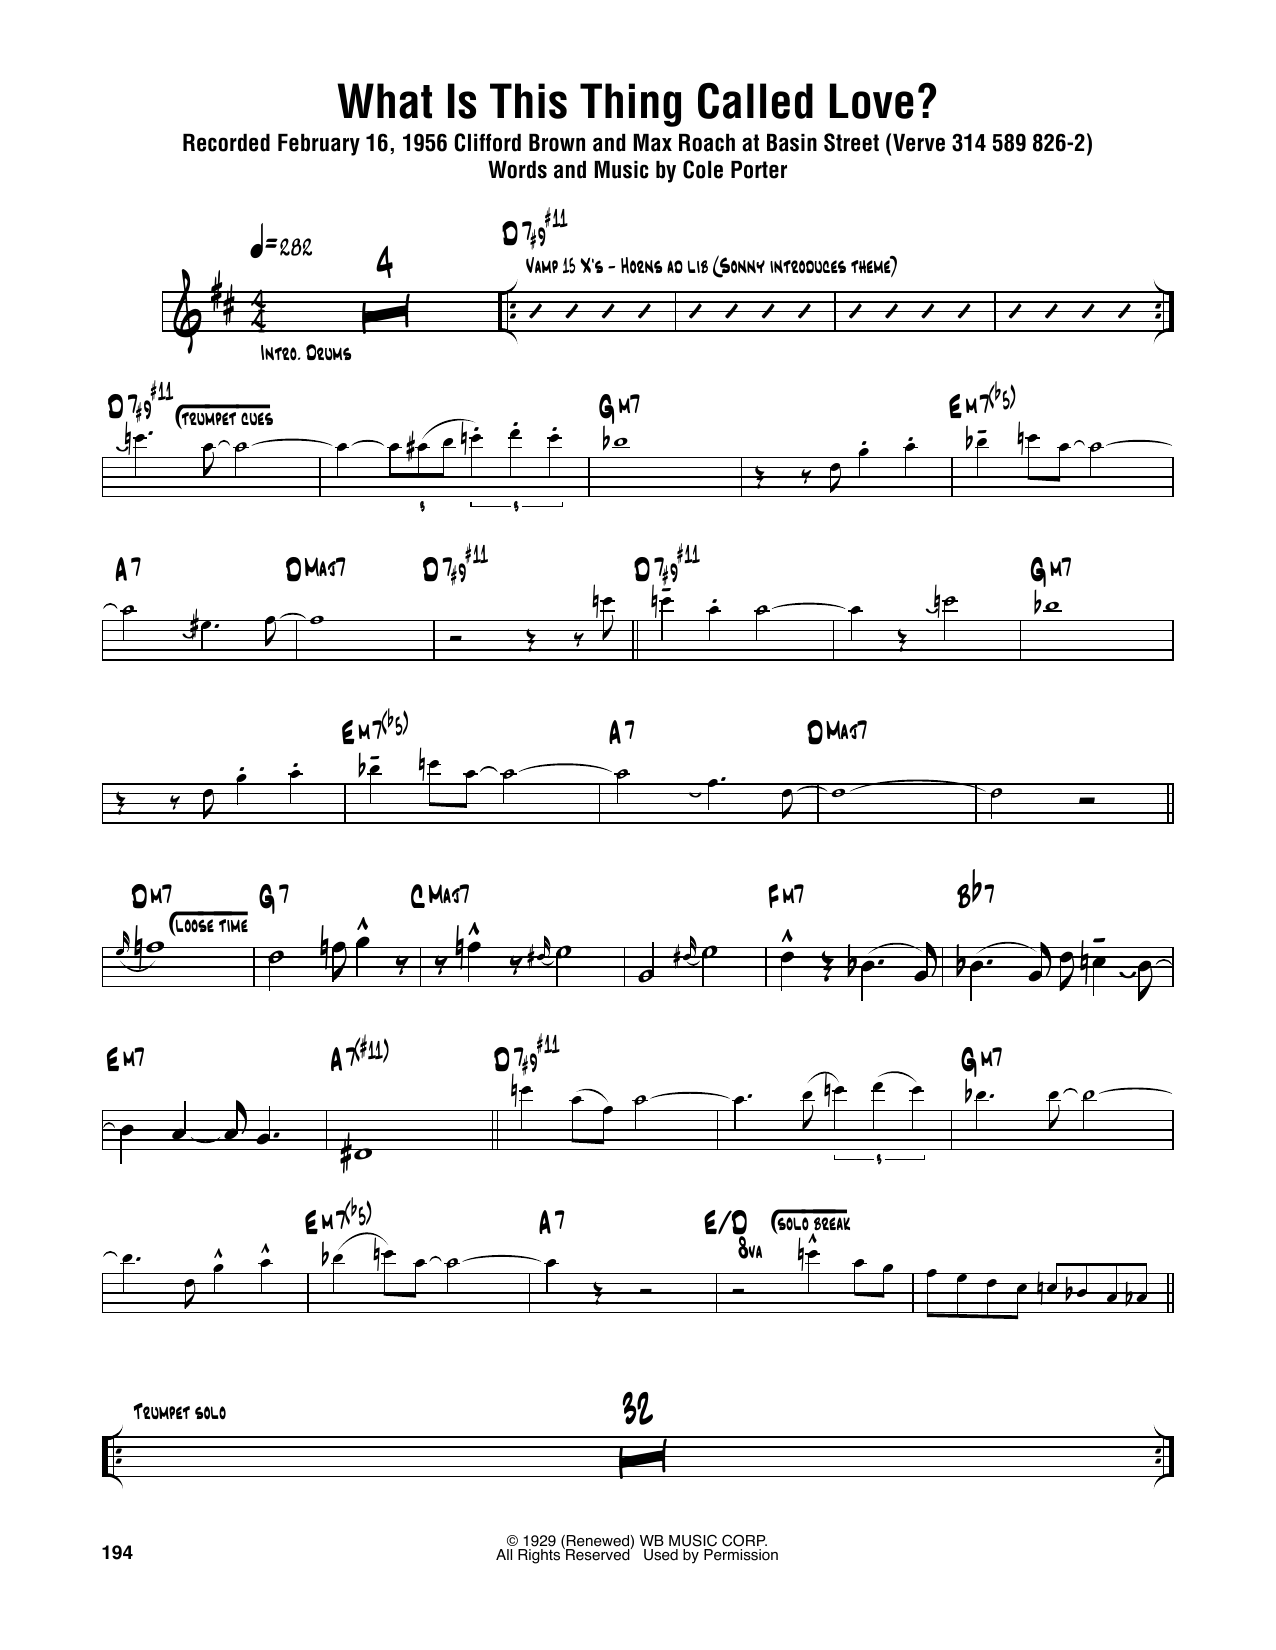 Download Sonny Rollins What Is This Thing Called Love? Sheet Music